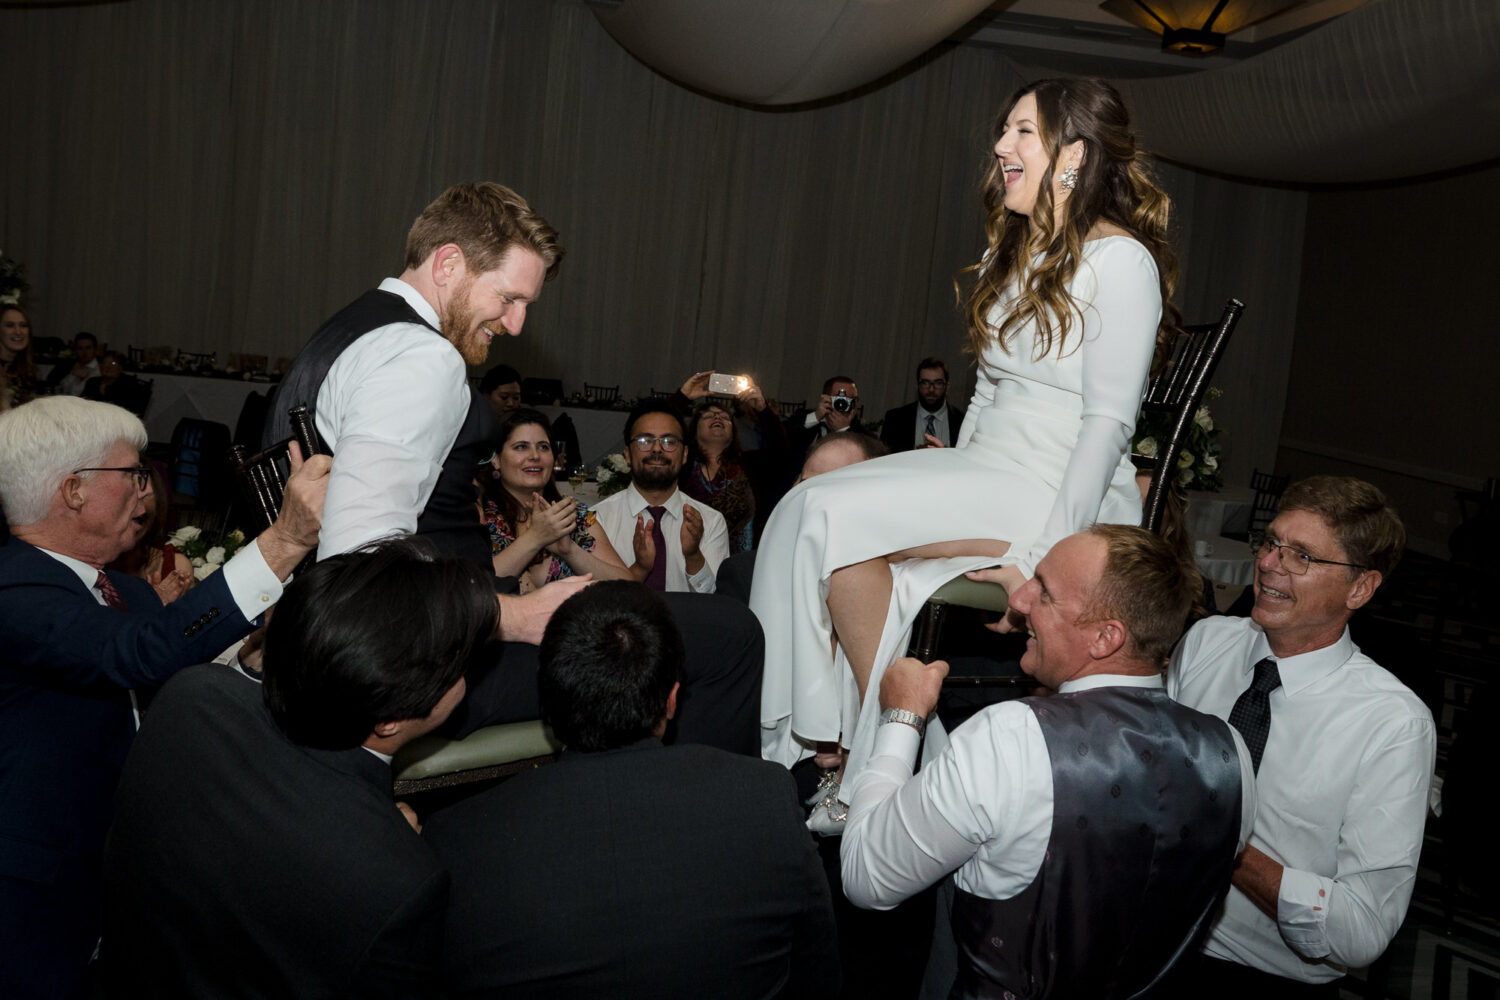 Wedding guests lift the bride and groom up on chairs.